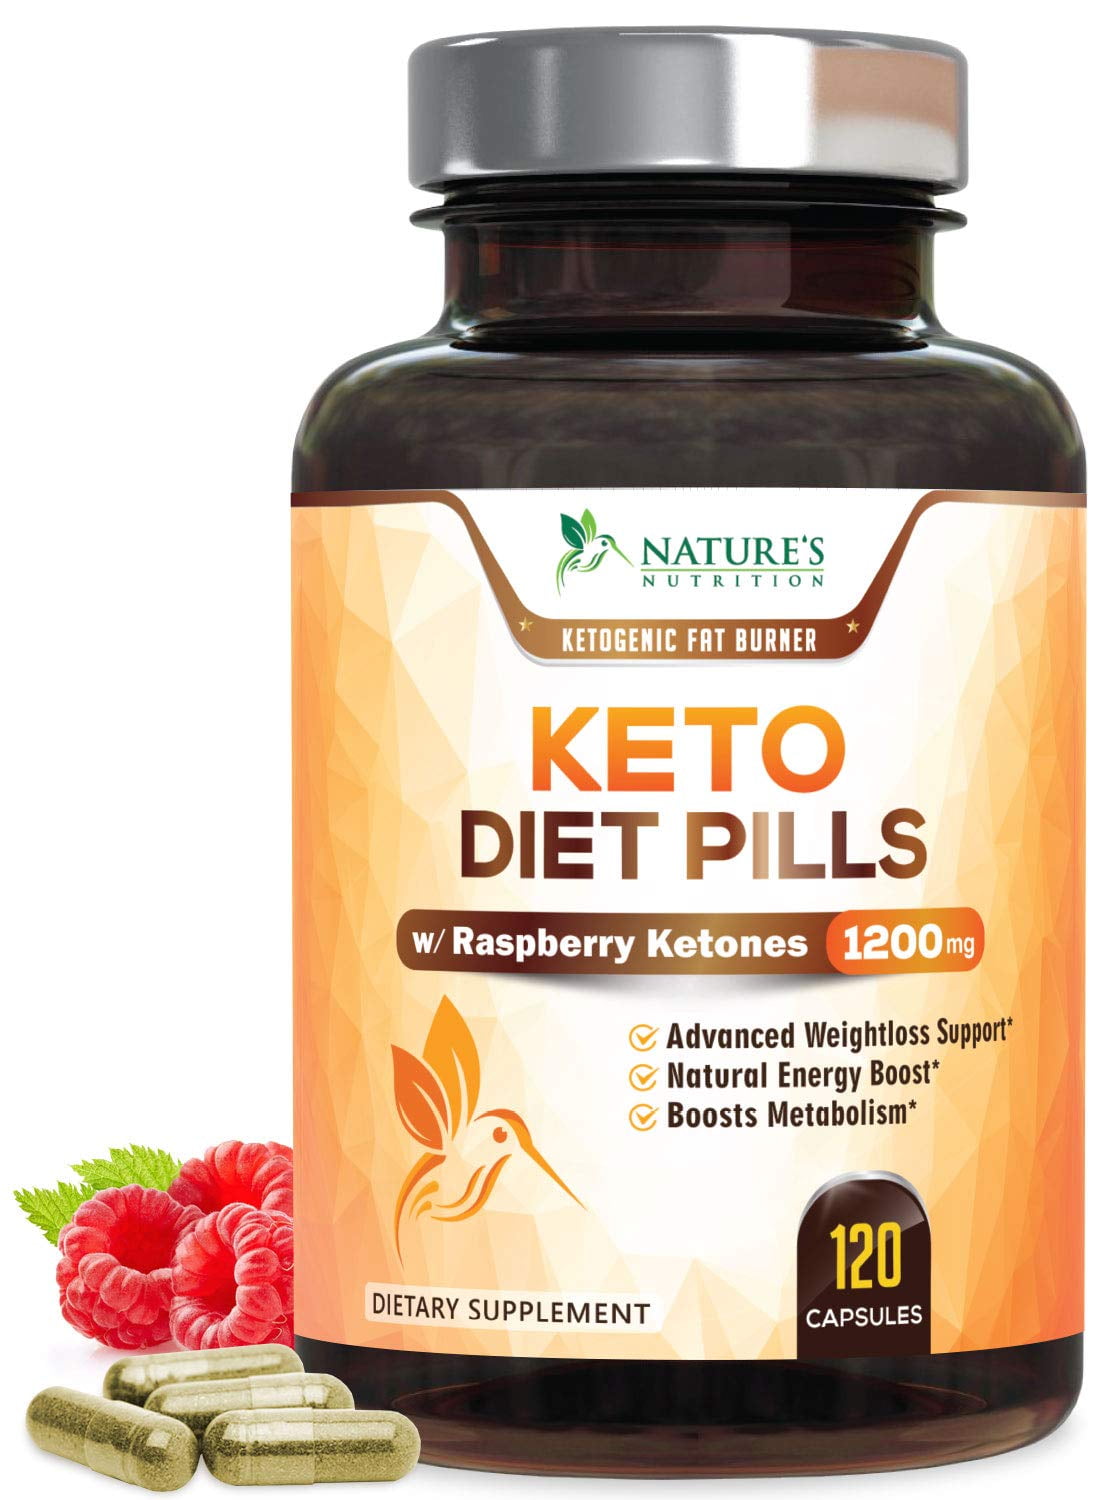 Nature’s Nutrition Keto Diet Pills for Advanced Weight Loss, 1200mg